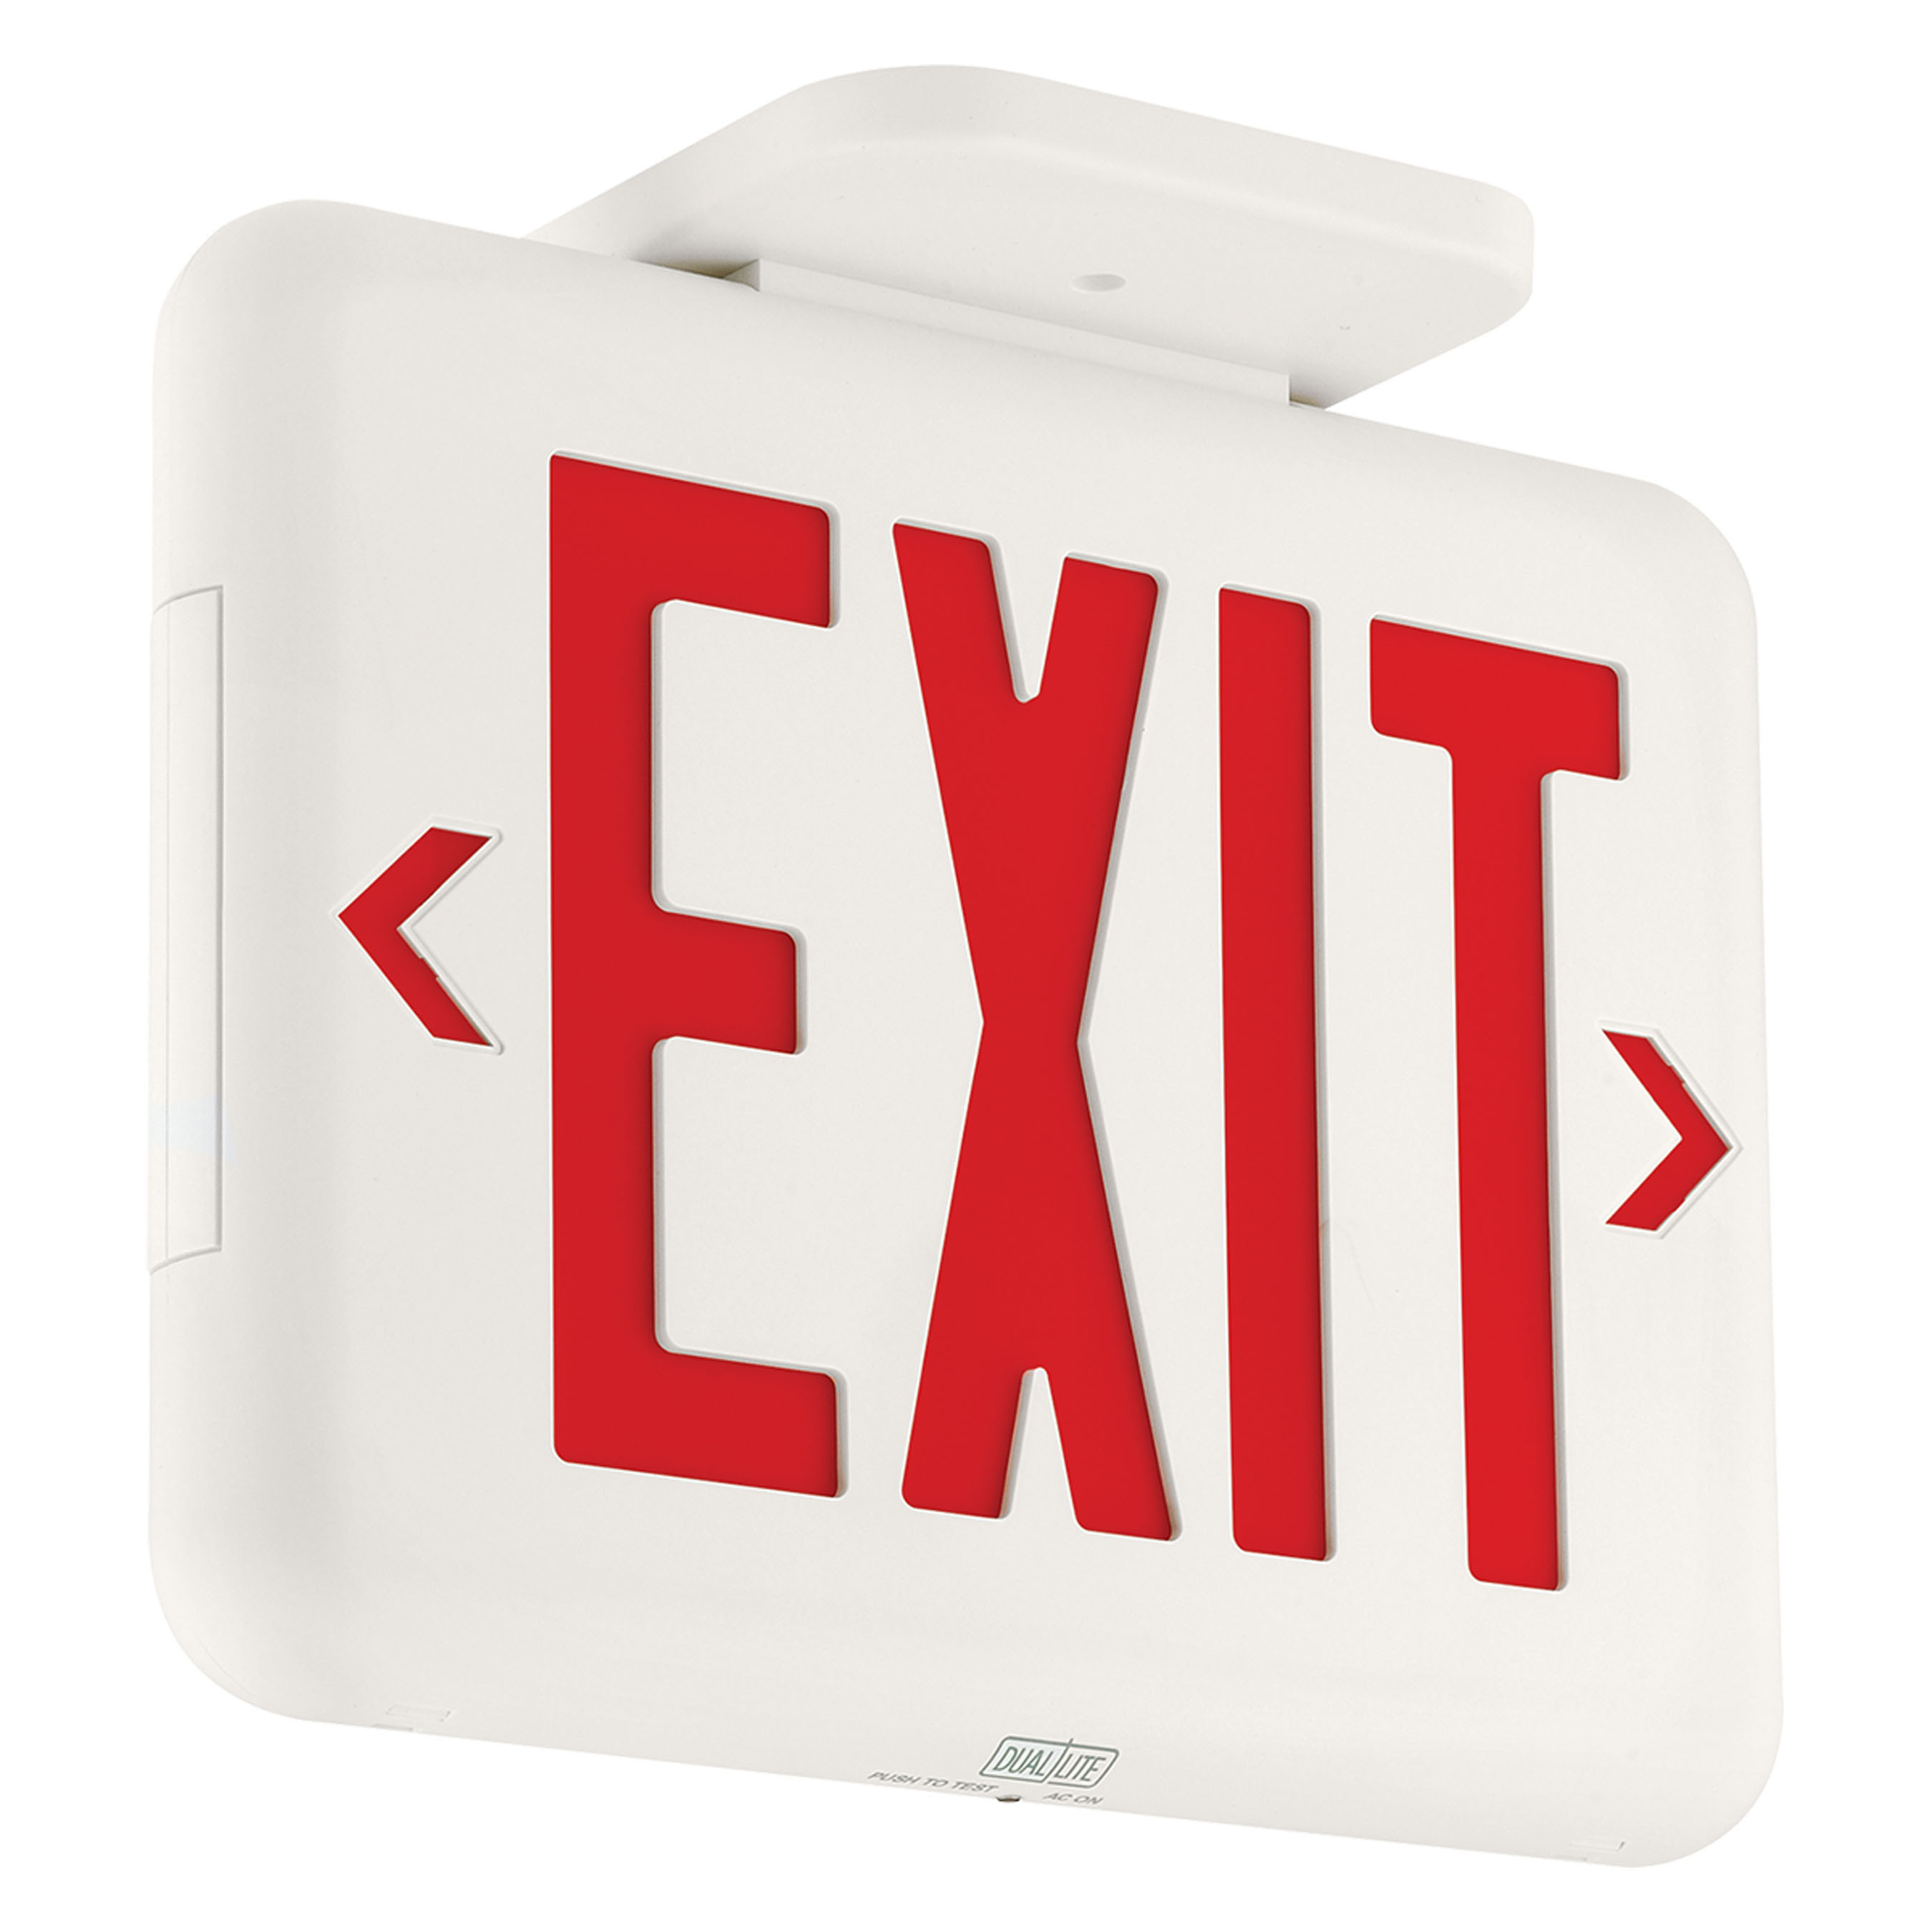 Dual-Lite's ultra-efficient, technologically advanced, compact EVE Series LED Exit Sign. (PRNewsFoto/Hubbell Lighting) (PRNewsFoto/HUBBELL LIGHTING)